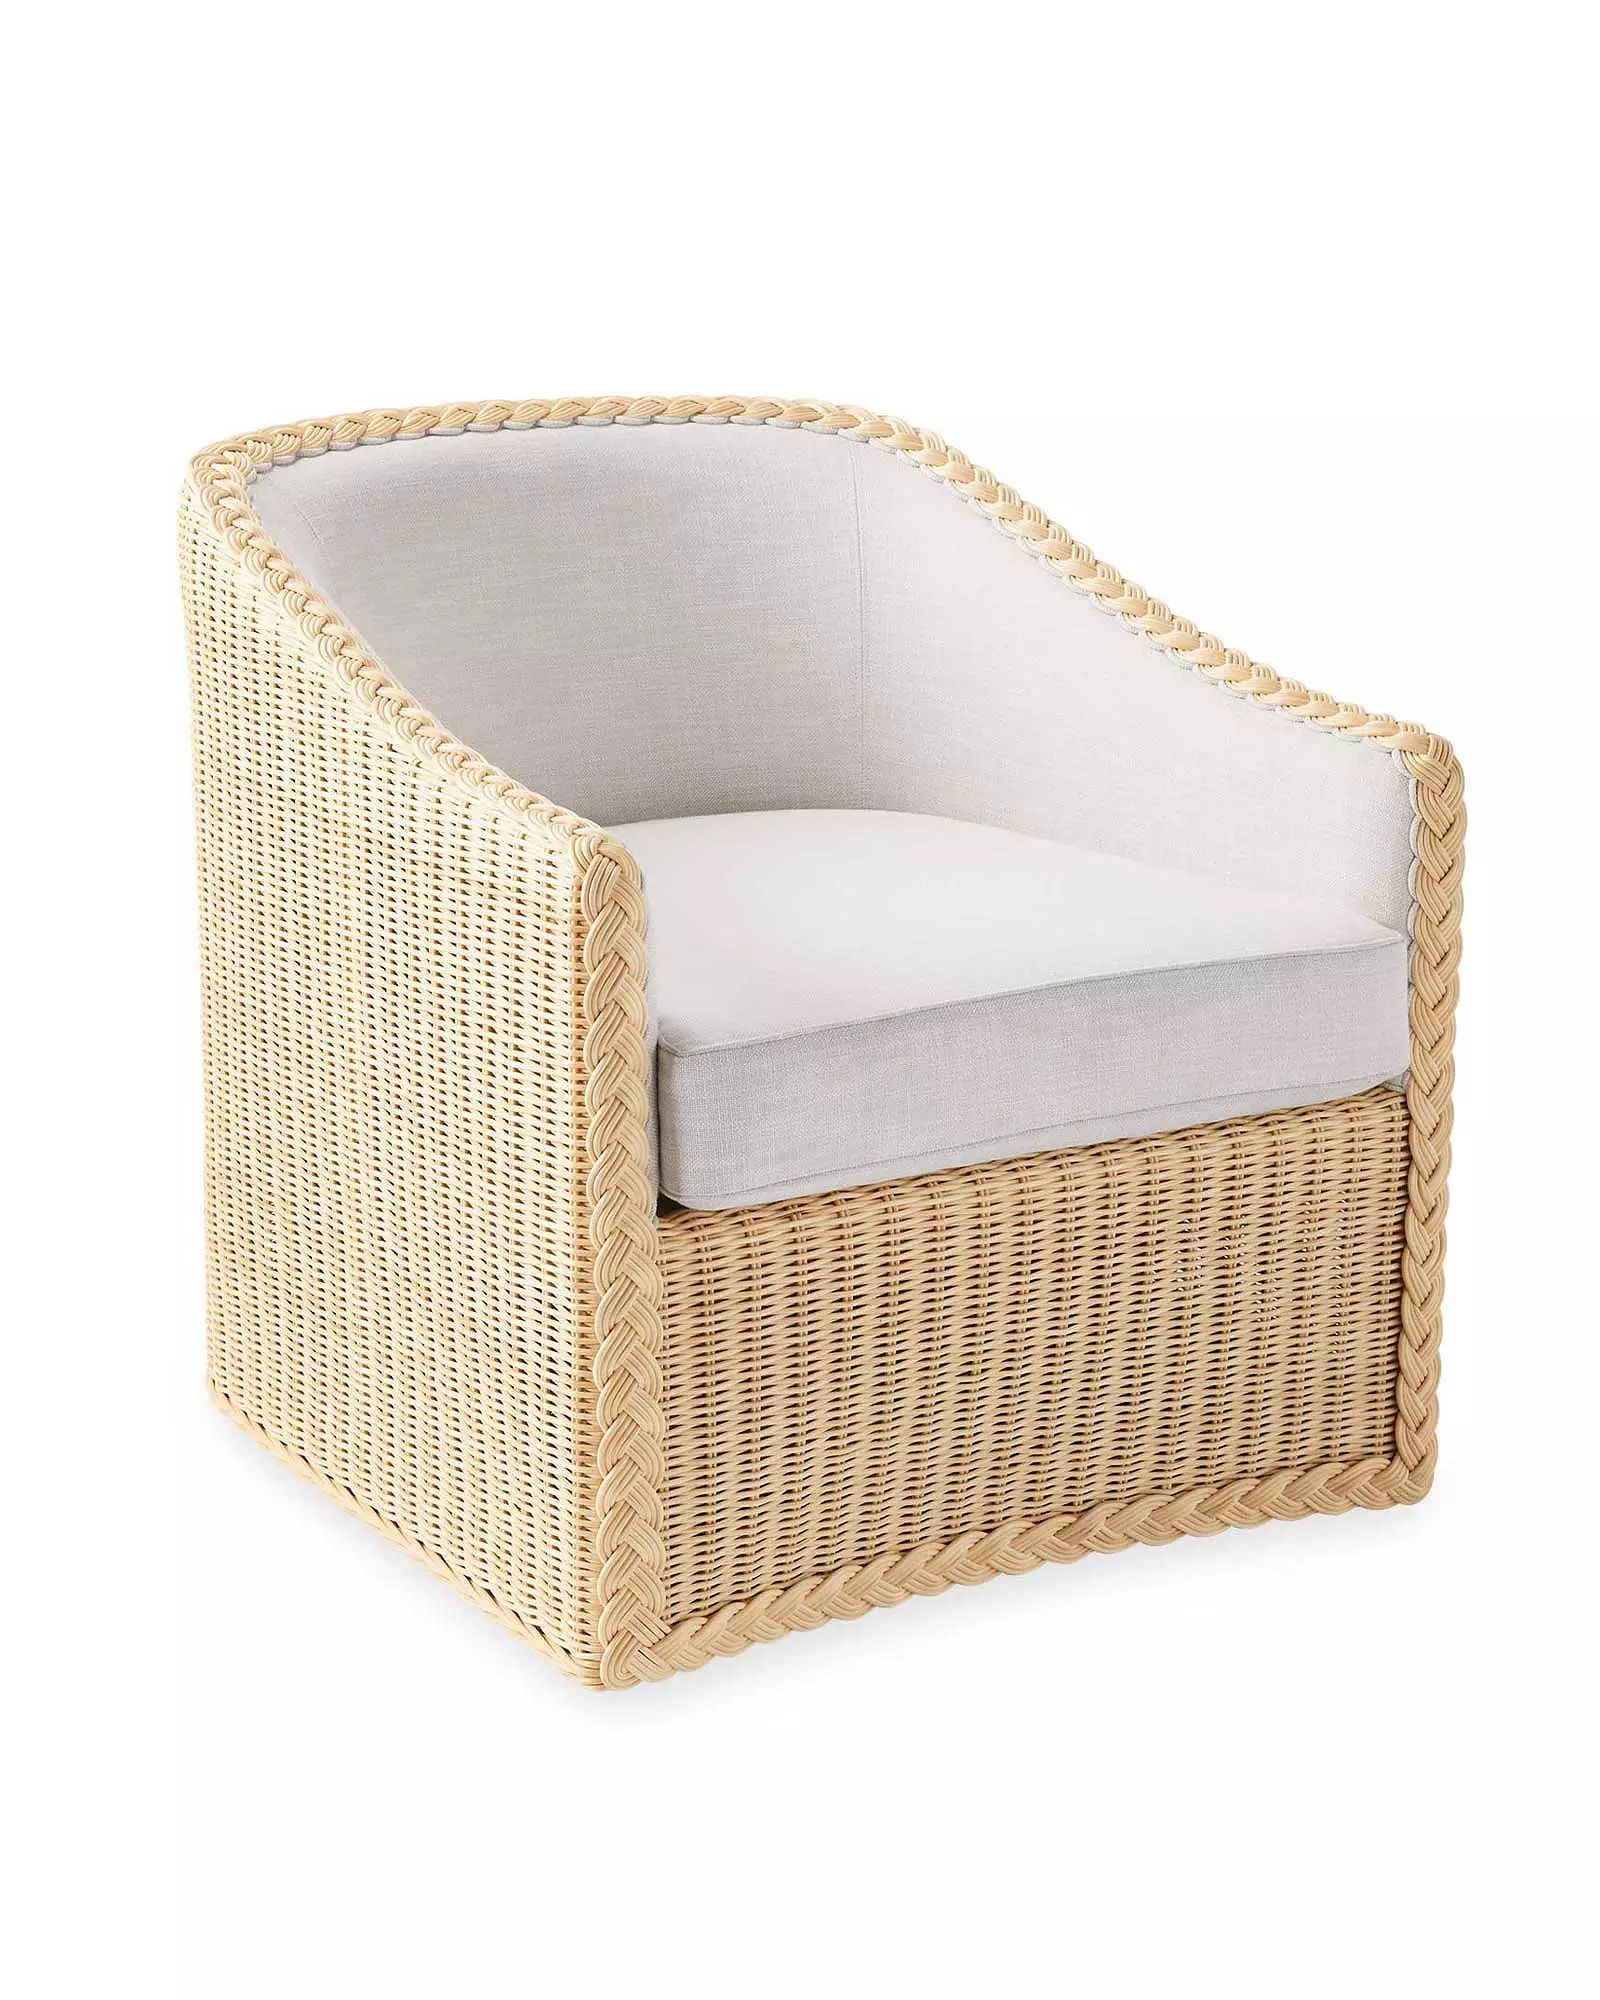 Yarmouth Swivel Chair - Sunbleached Wicker | Serena and Lily